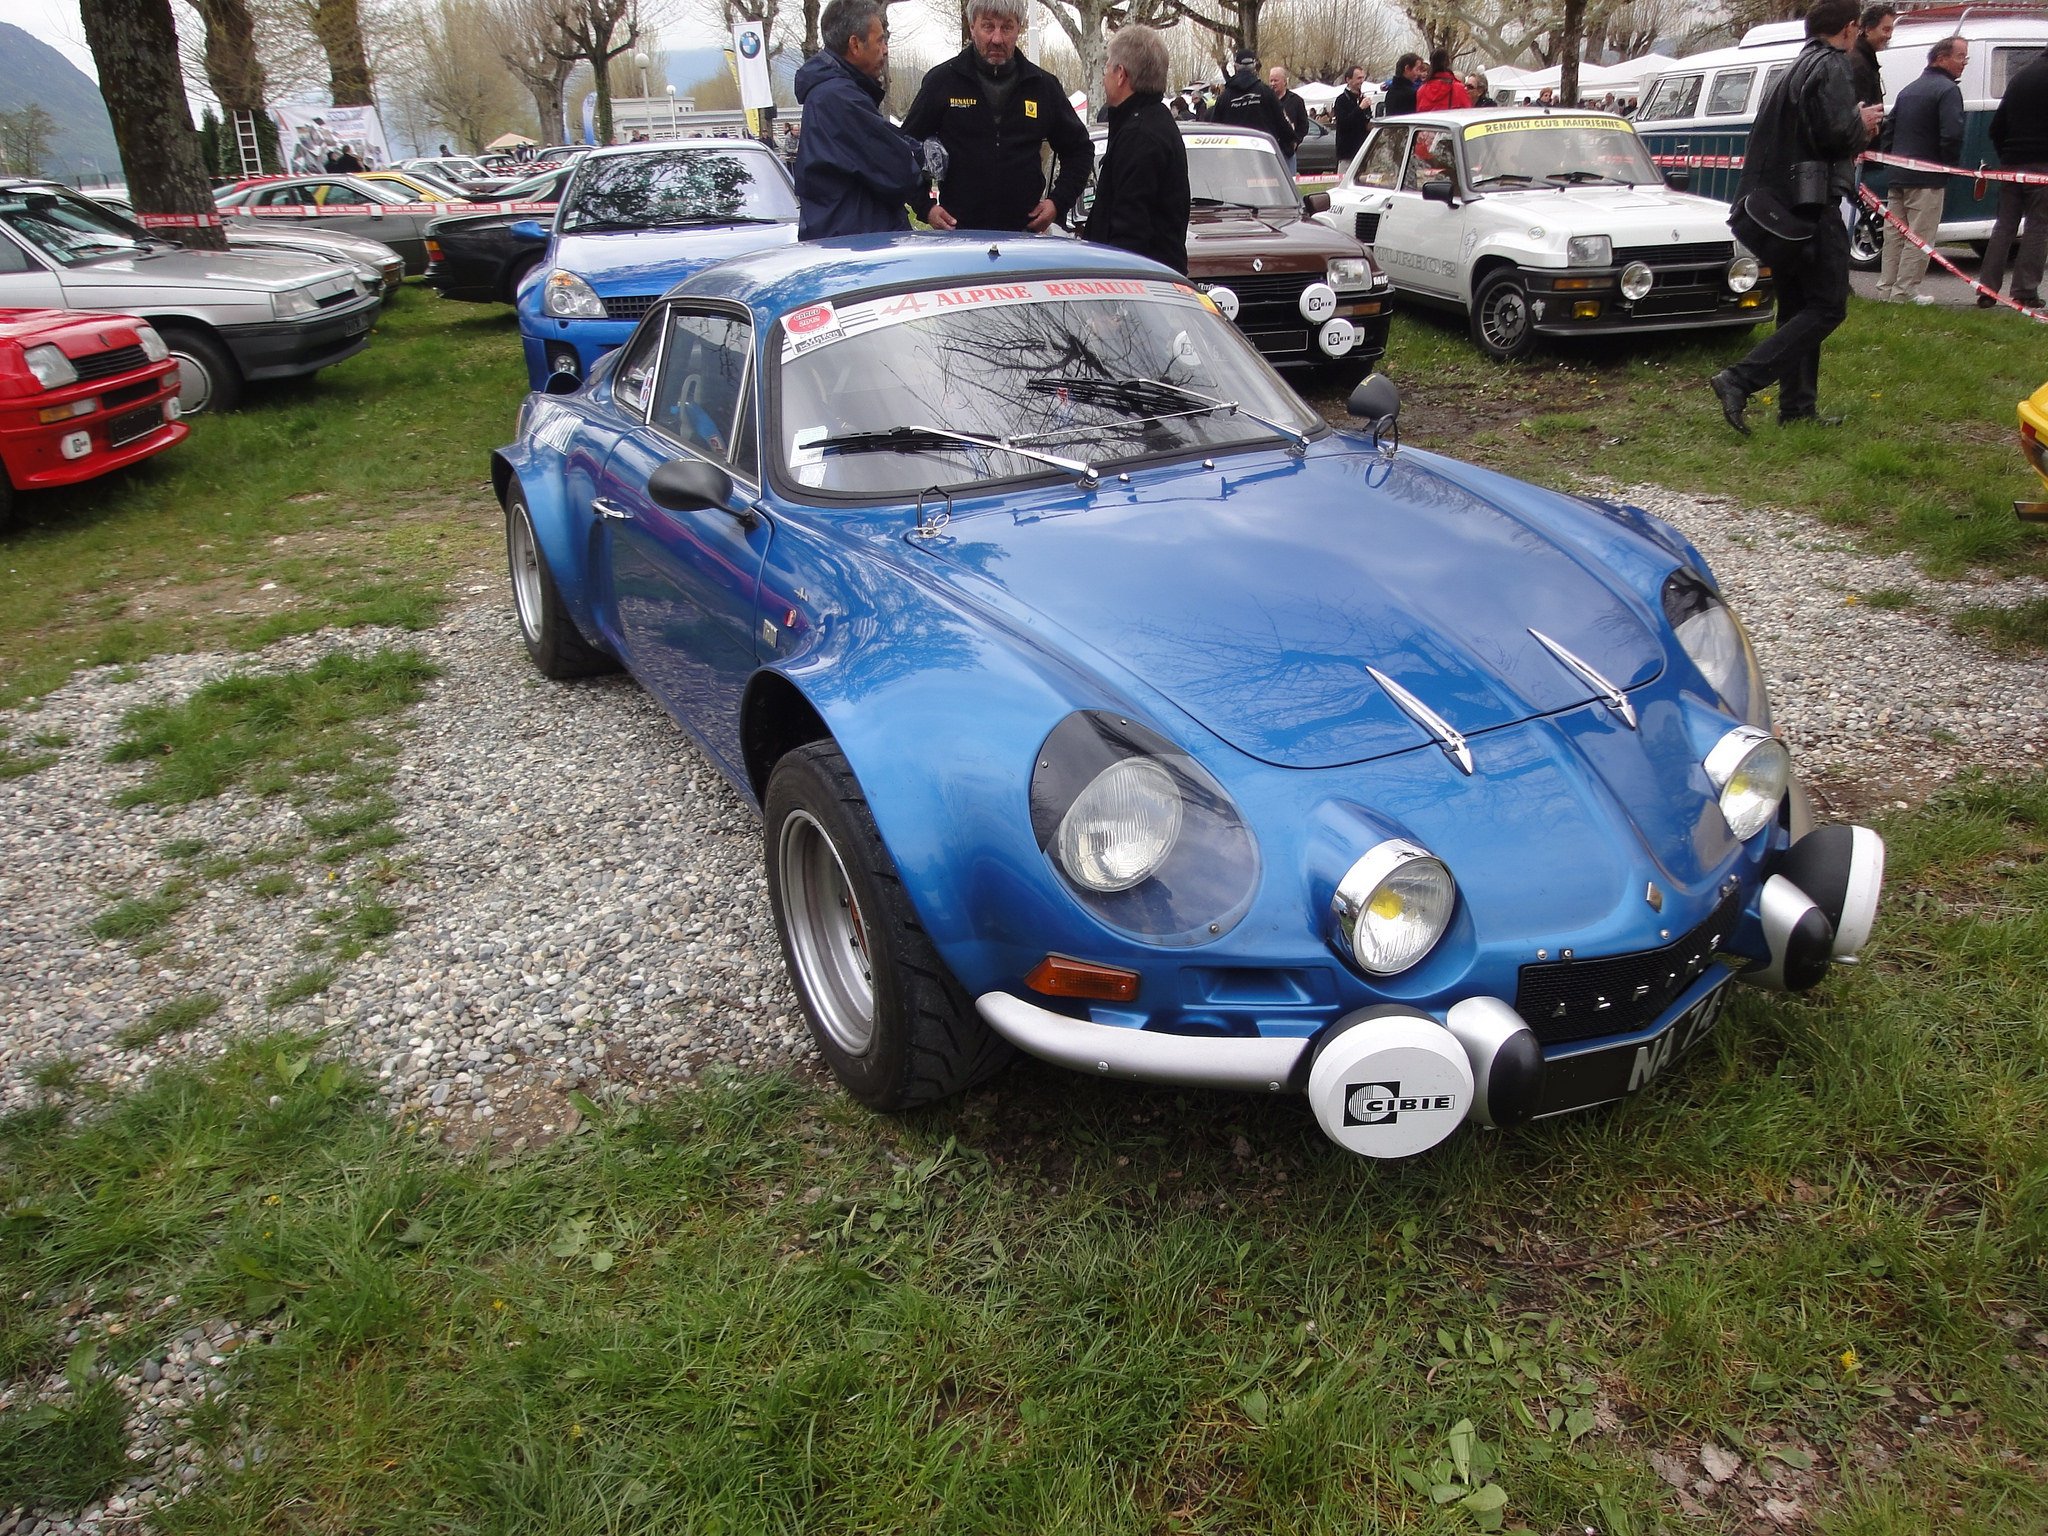 a110, Alpine, Classic, Renault, Berlinette, Cars, Rallycars, French, Coupe Wallpaper